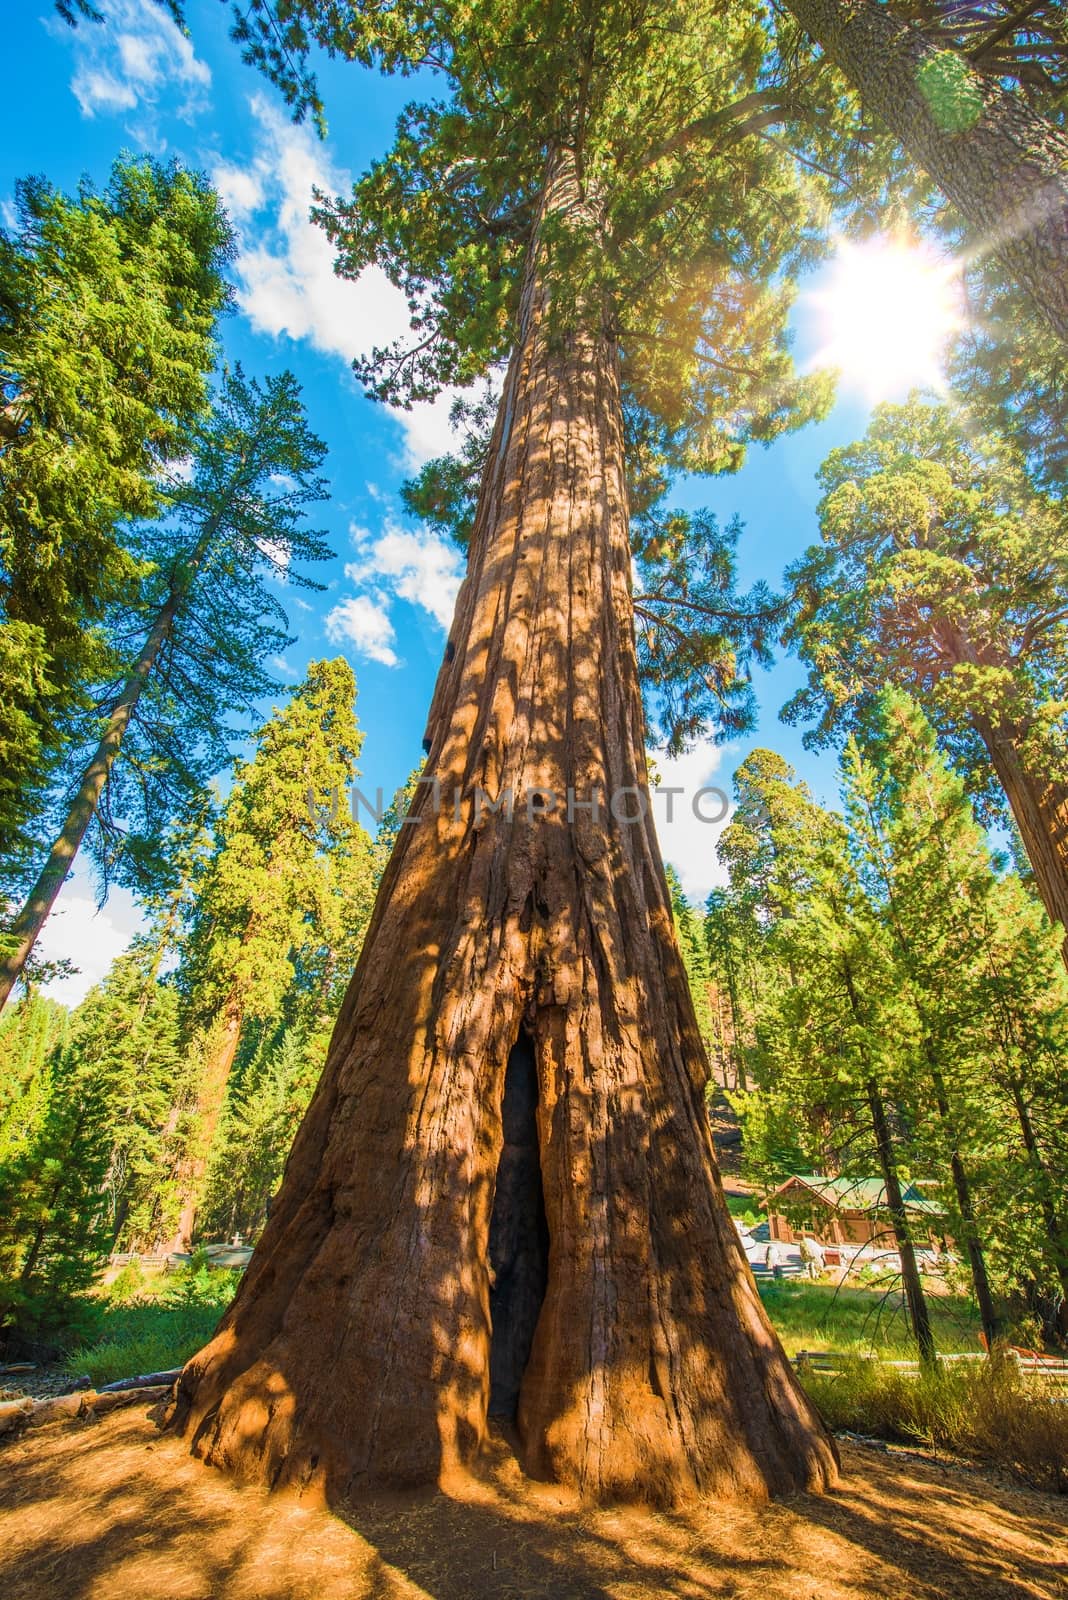 Between Sequoias by welcomia